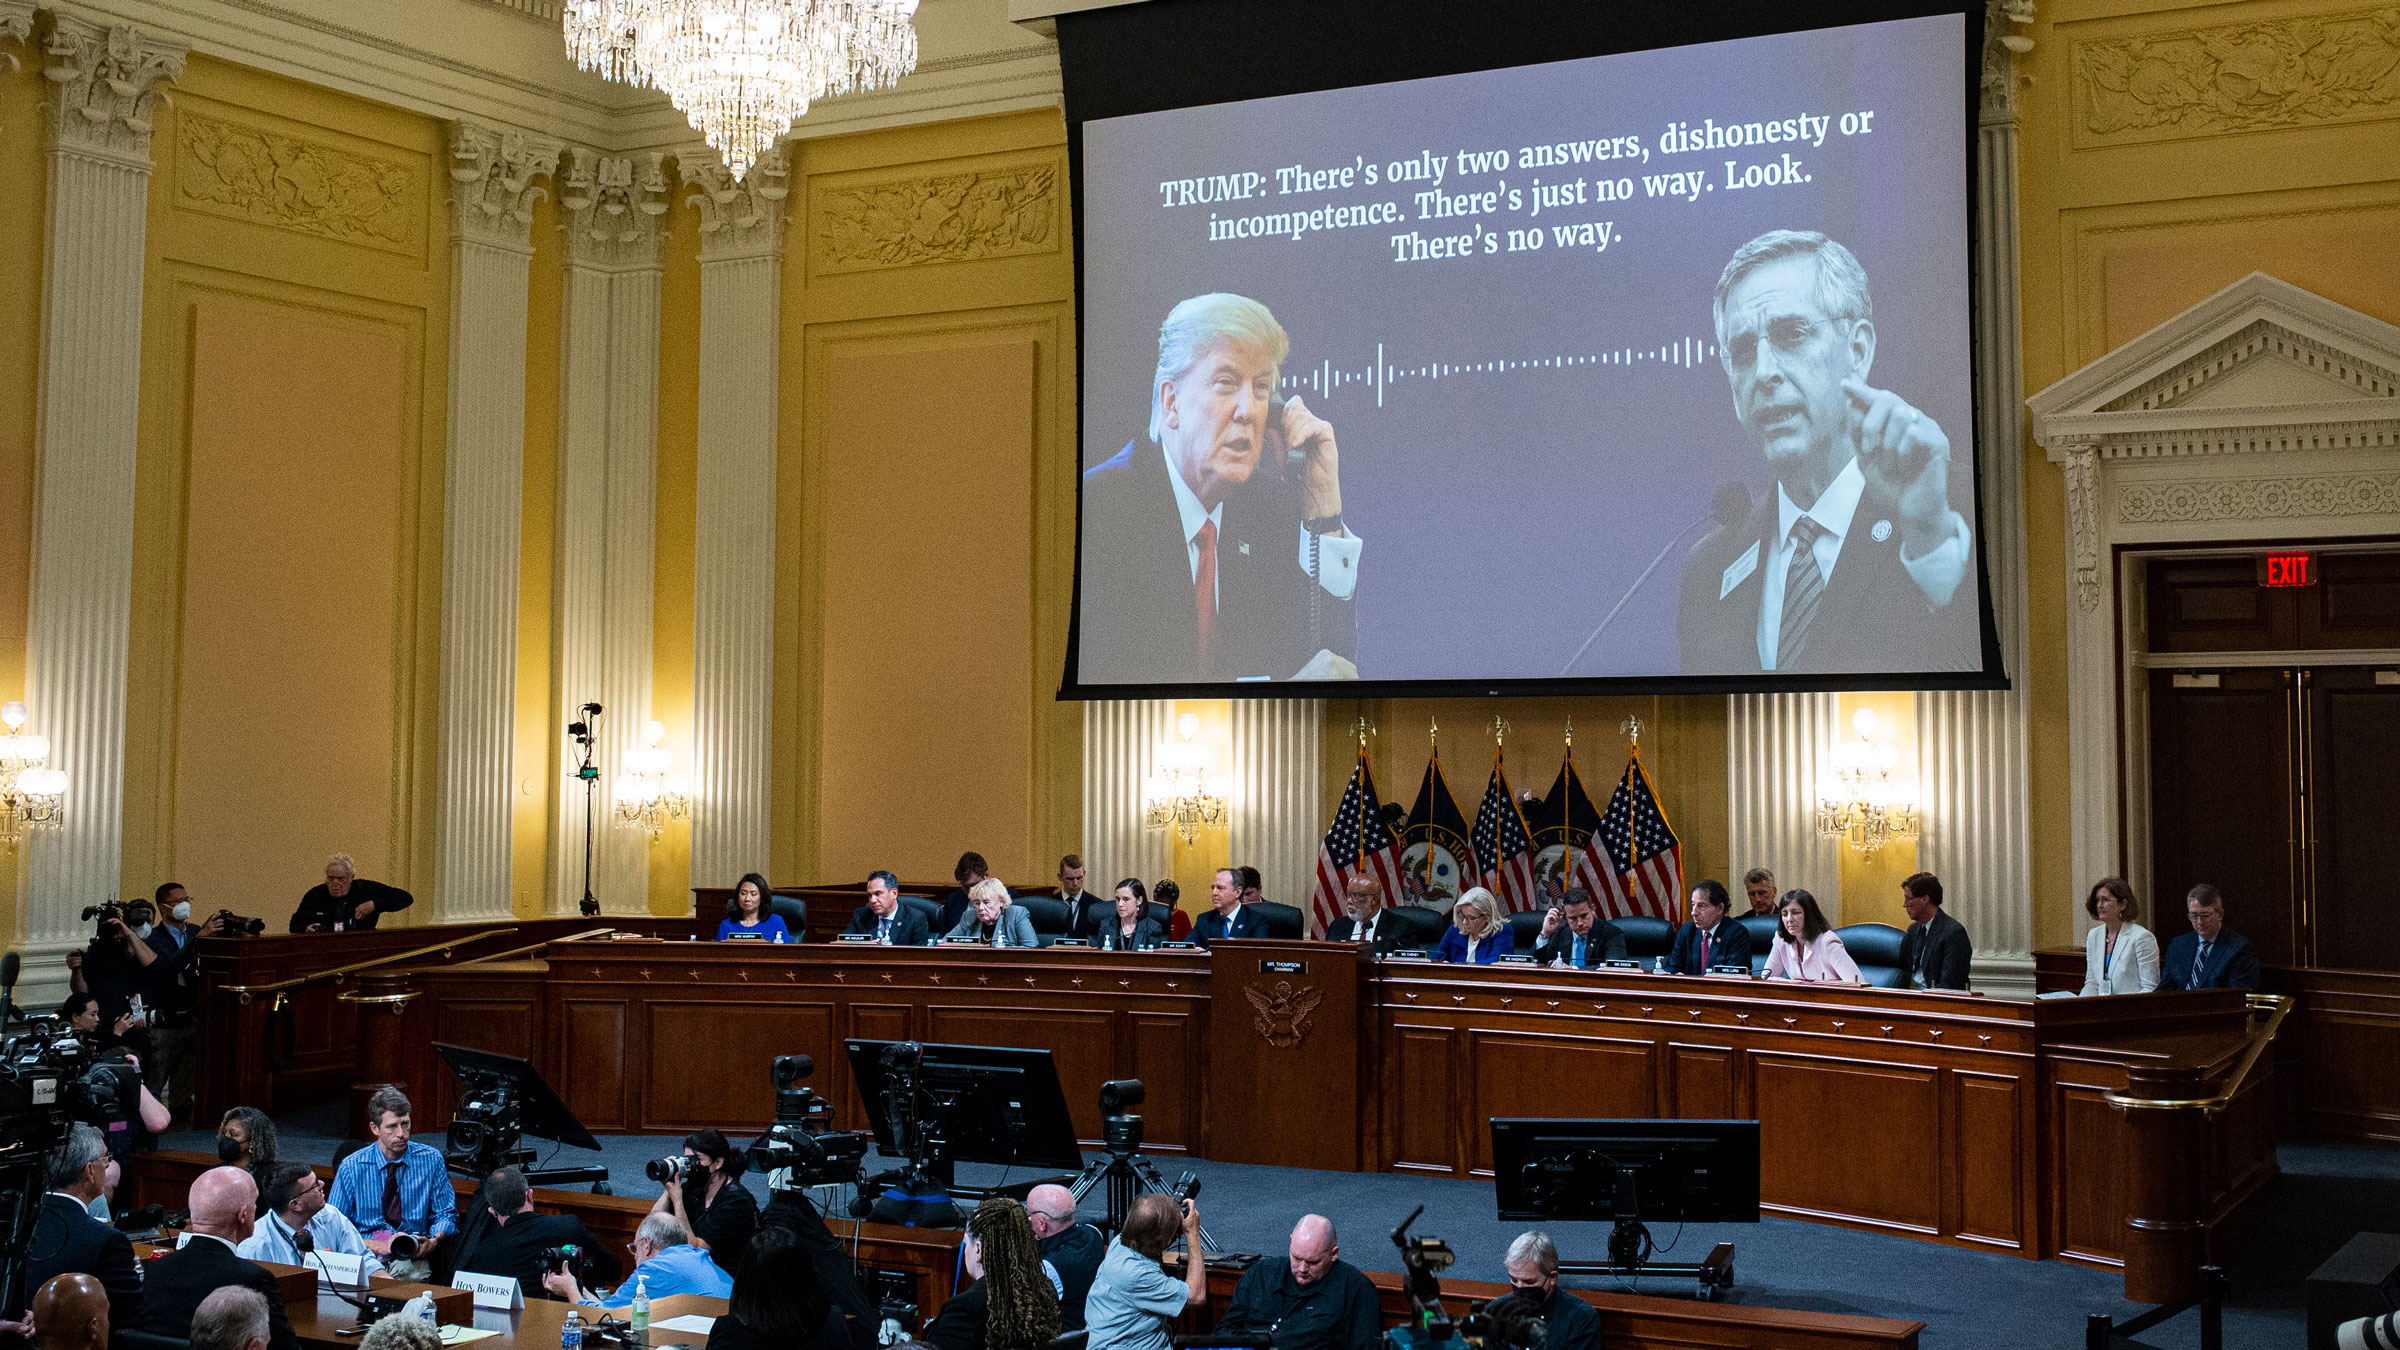 An audio recording of a phone call between then-President Donald Trump and Georgia Secretary of State Brad Raffensperger is played during Tuesday's hearing.